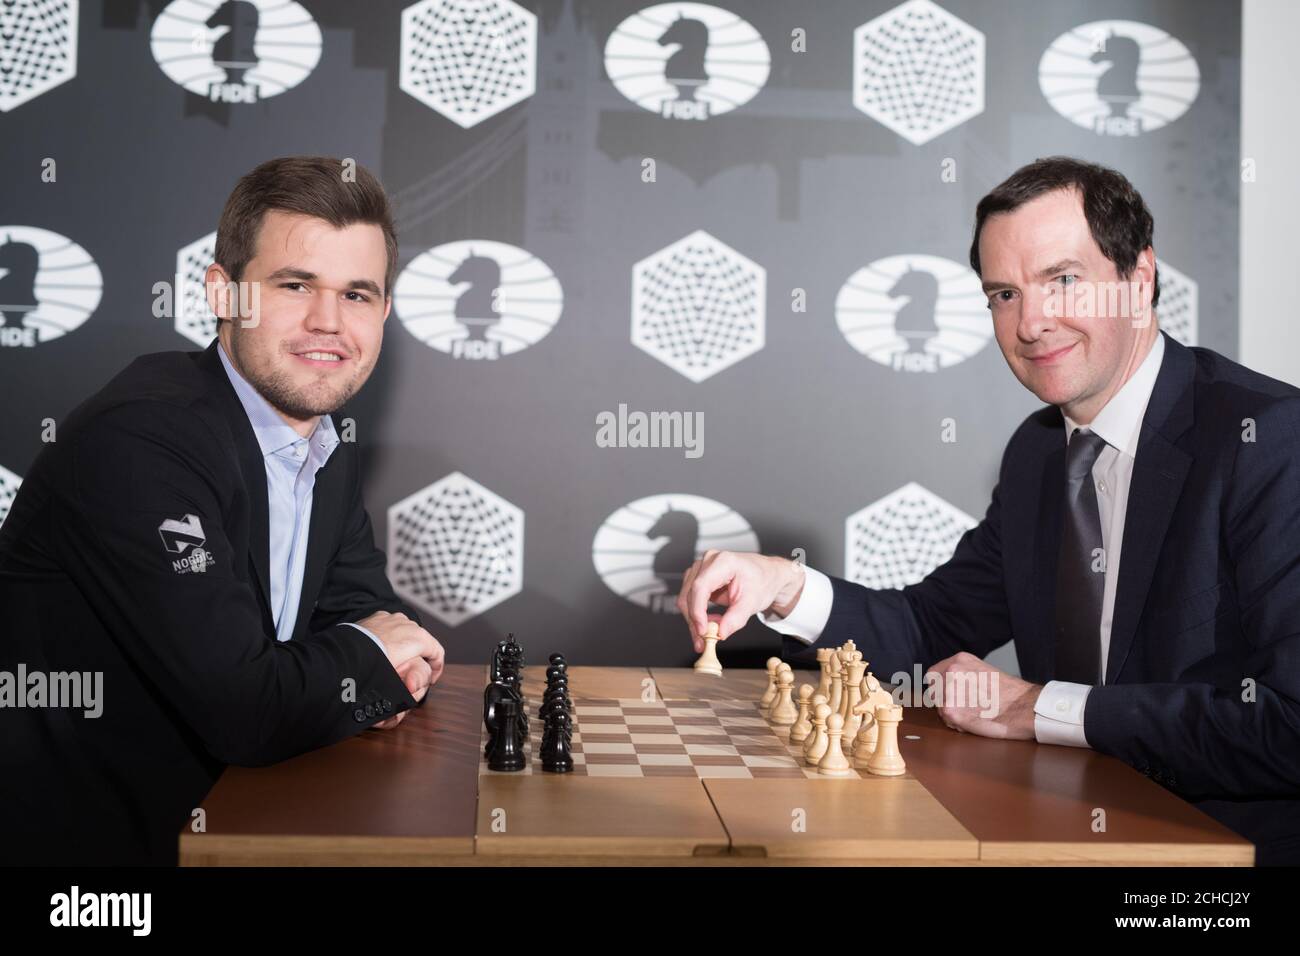 Carlsen, Nepomniachtchi, and Ju Wenjun, among the participants of